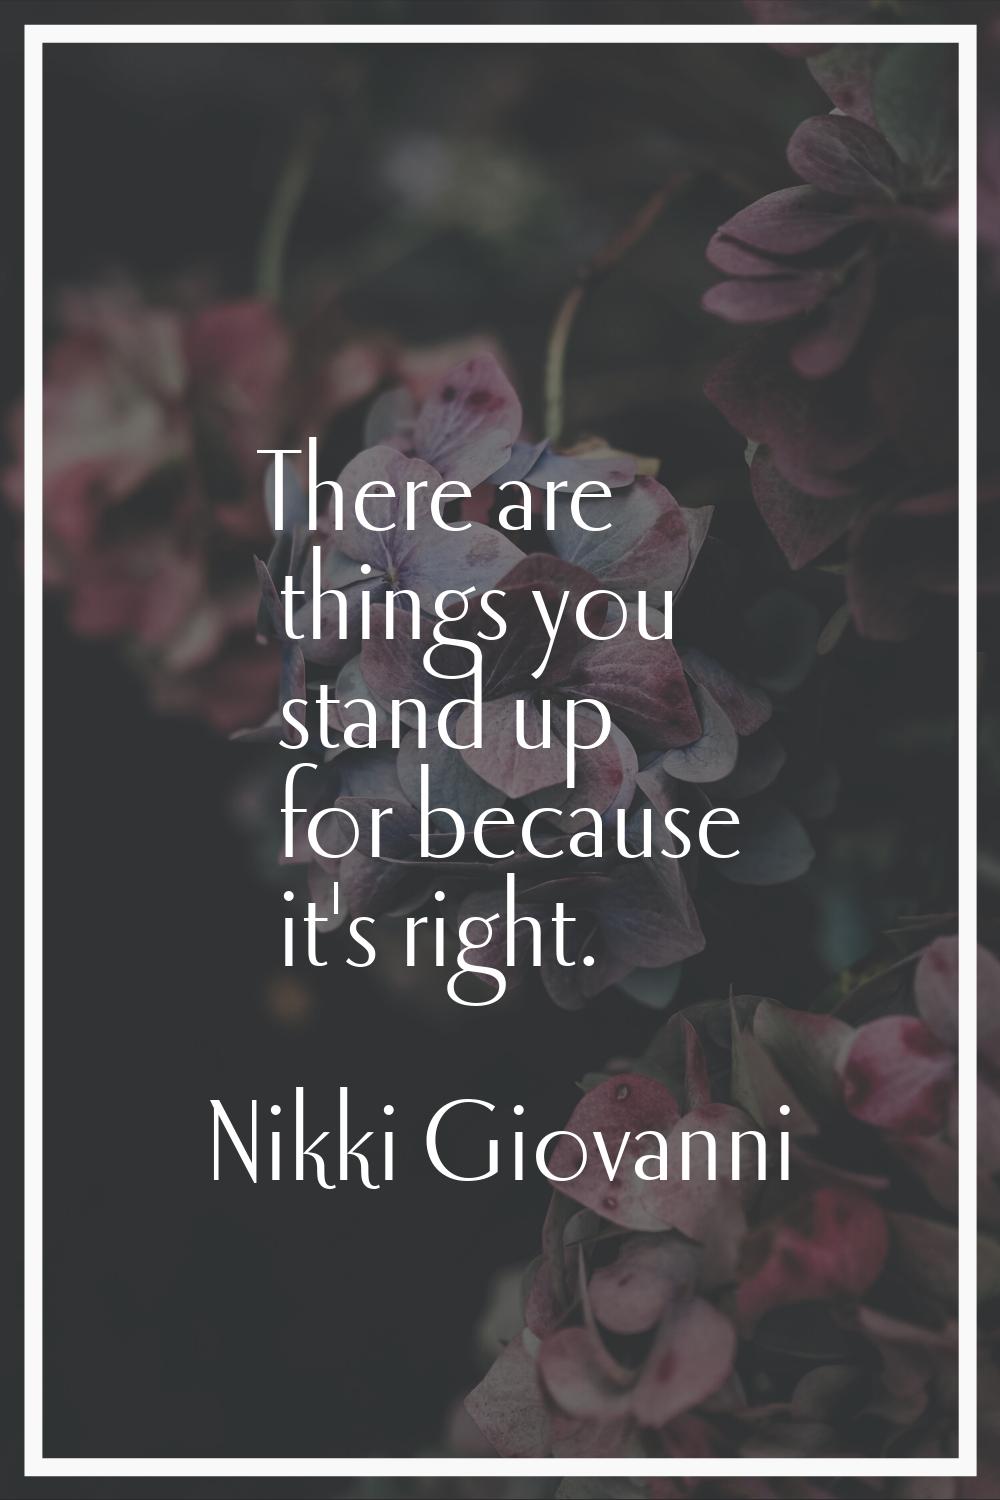 There are things you stand up for because it's right.